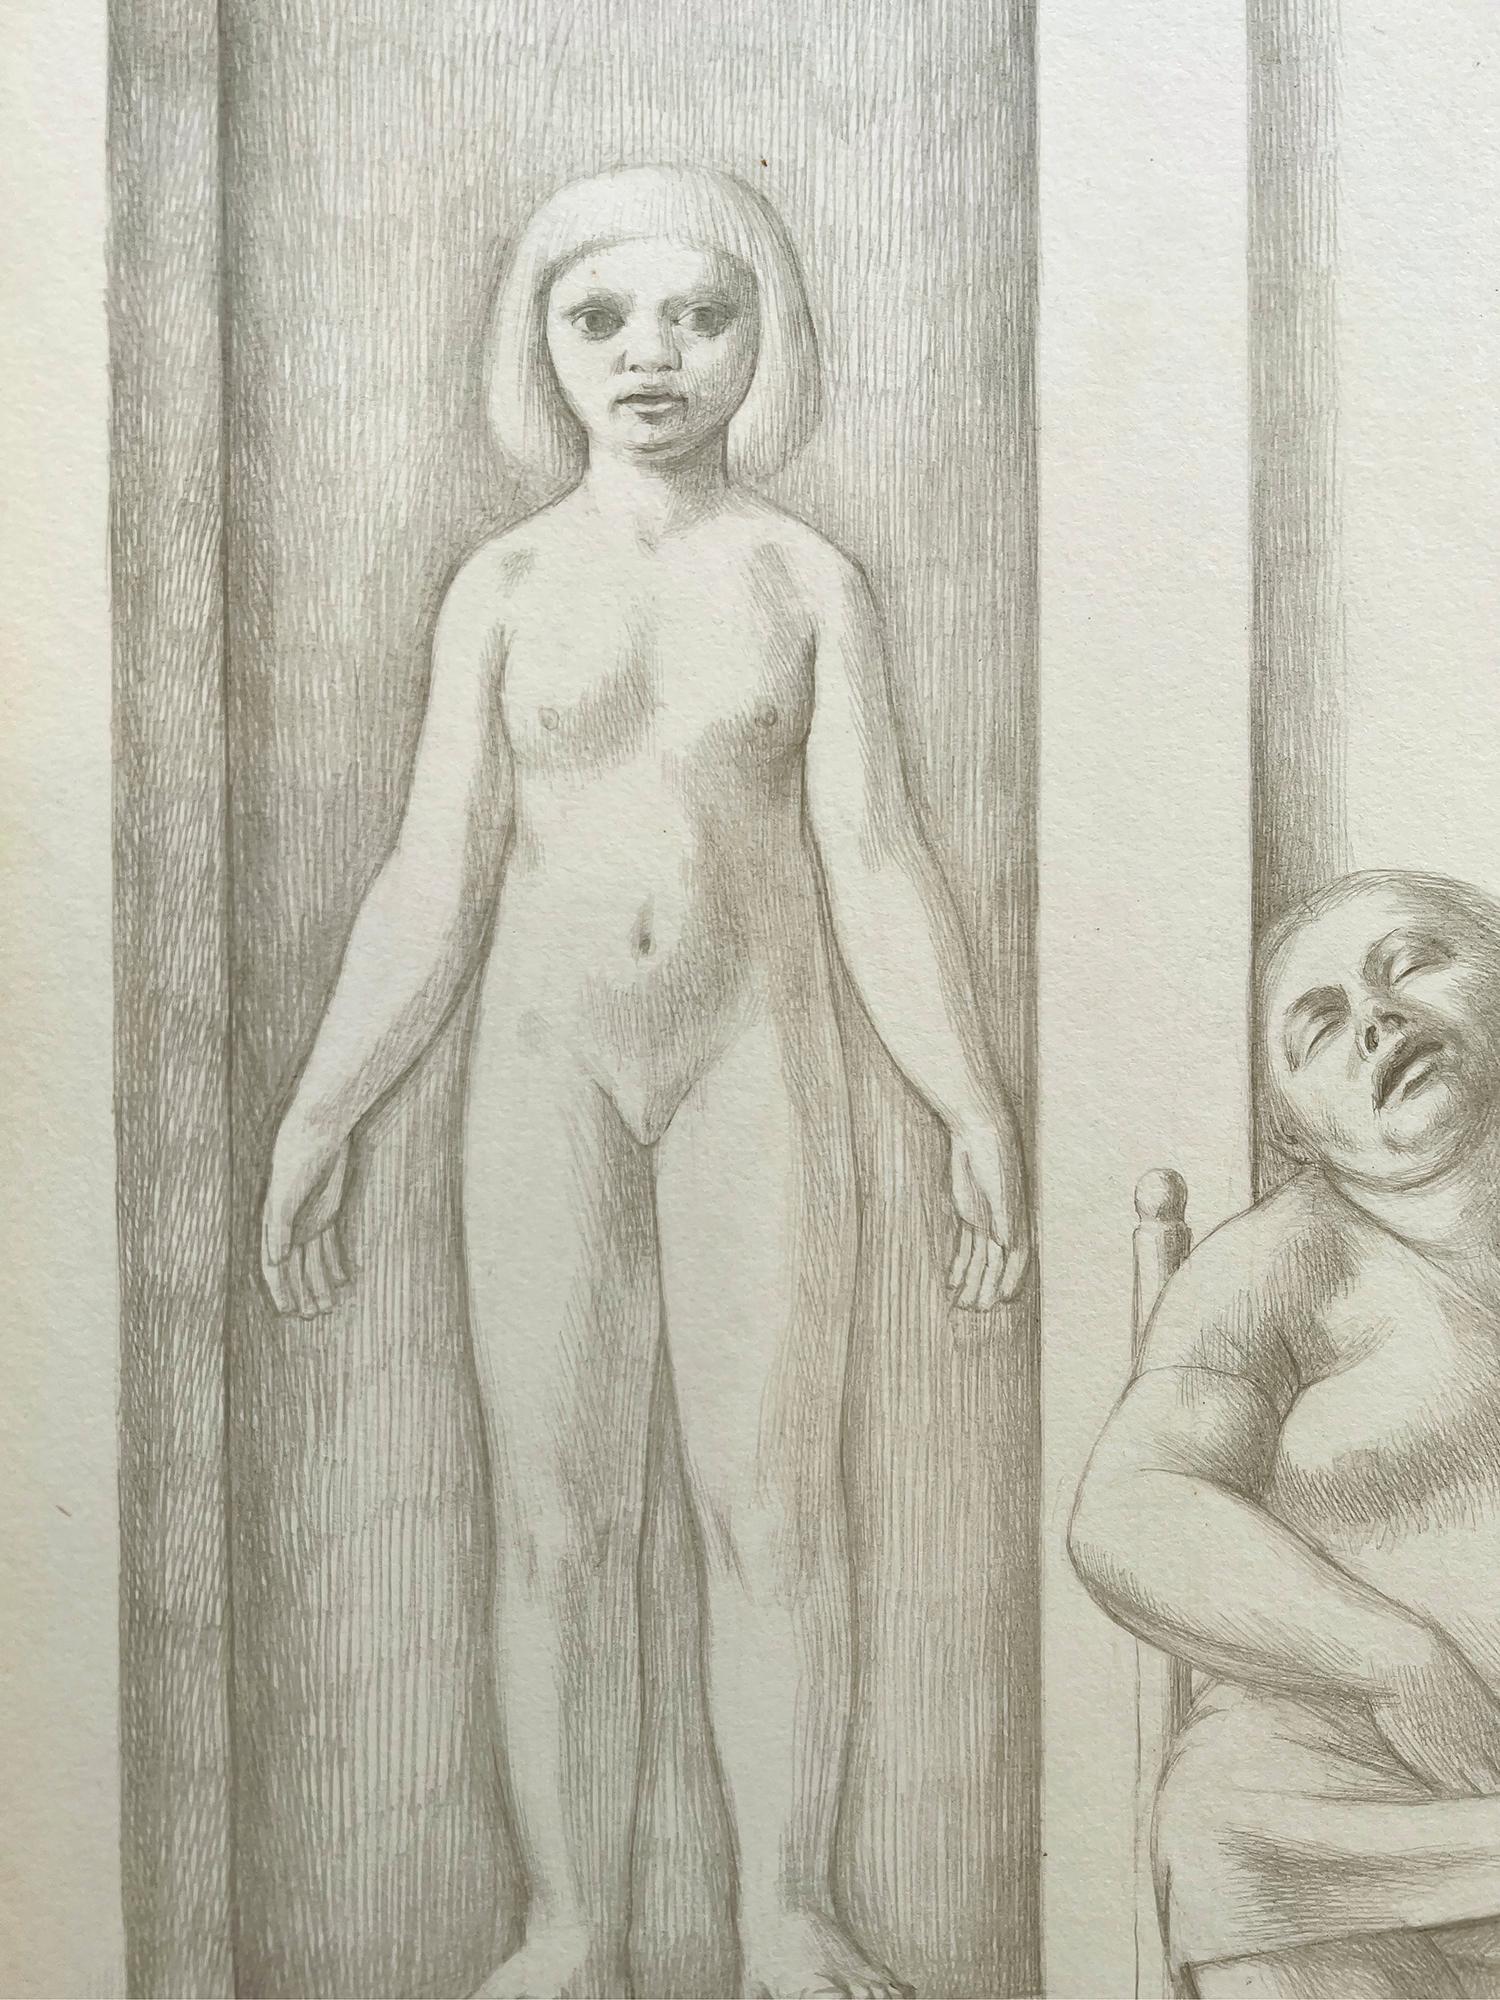 Two Women, Erotic Nude Woman - Lesbian Dream -  Existential Magic Realism  - Art by George Tooker